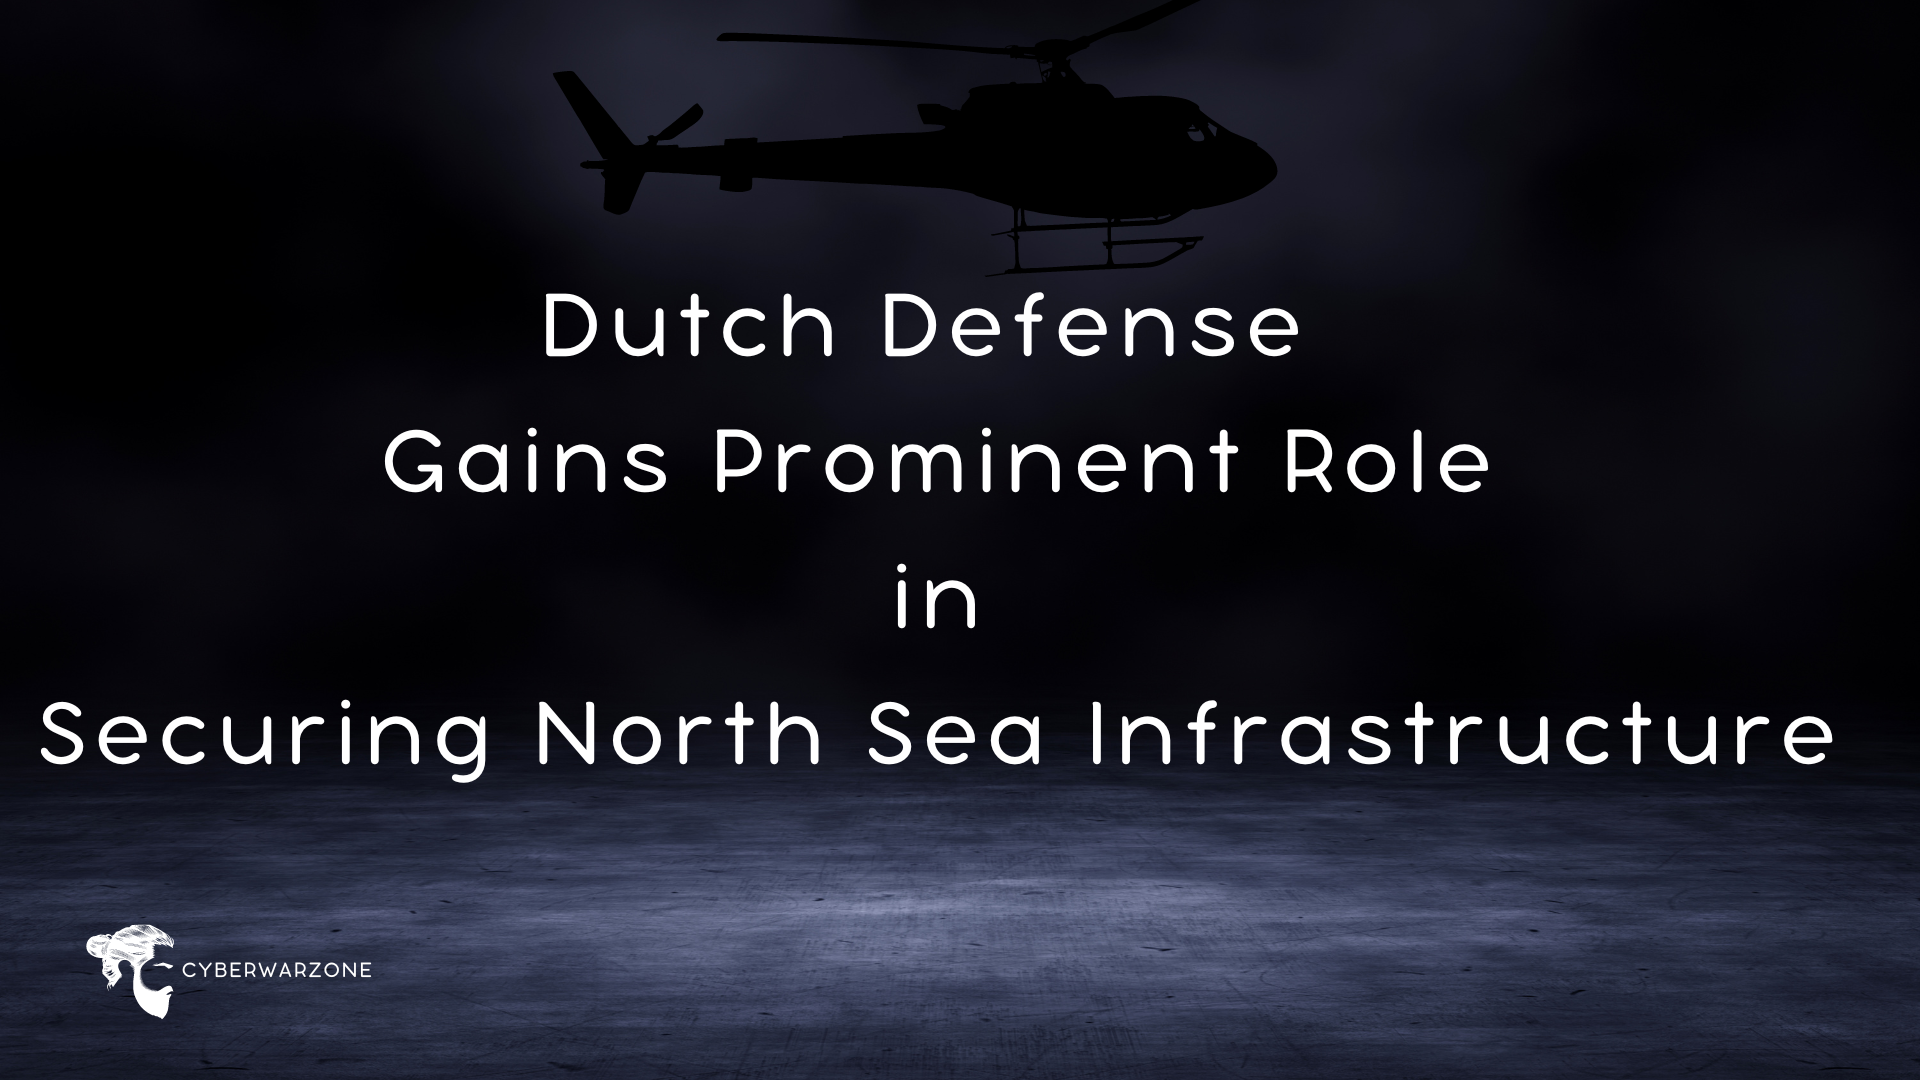 Dutch Defense Gains Prominent Role in Securing North Sea Infrastructure